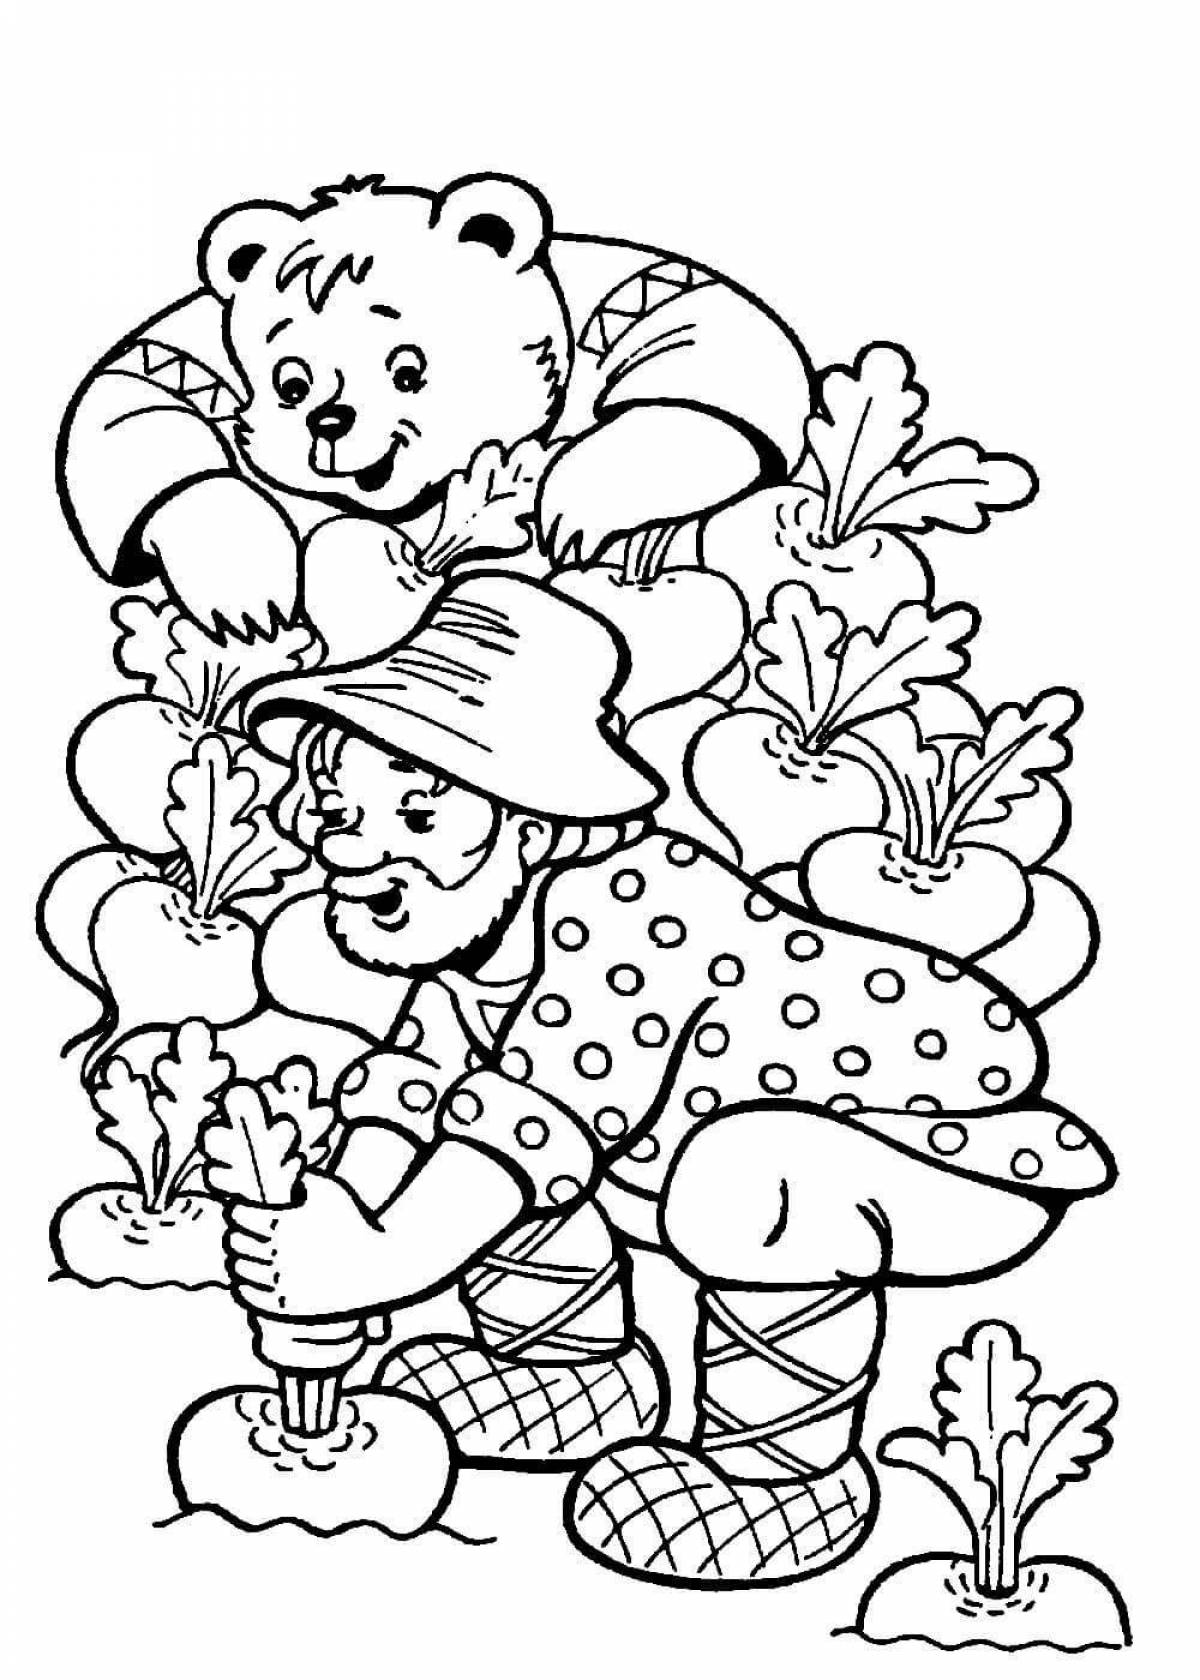 Poignant fairy tale coloring pages